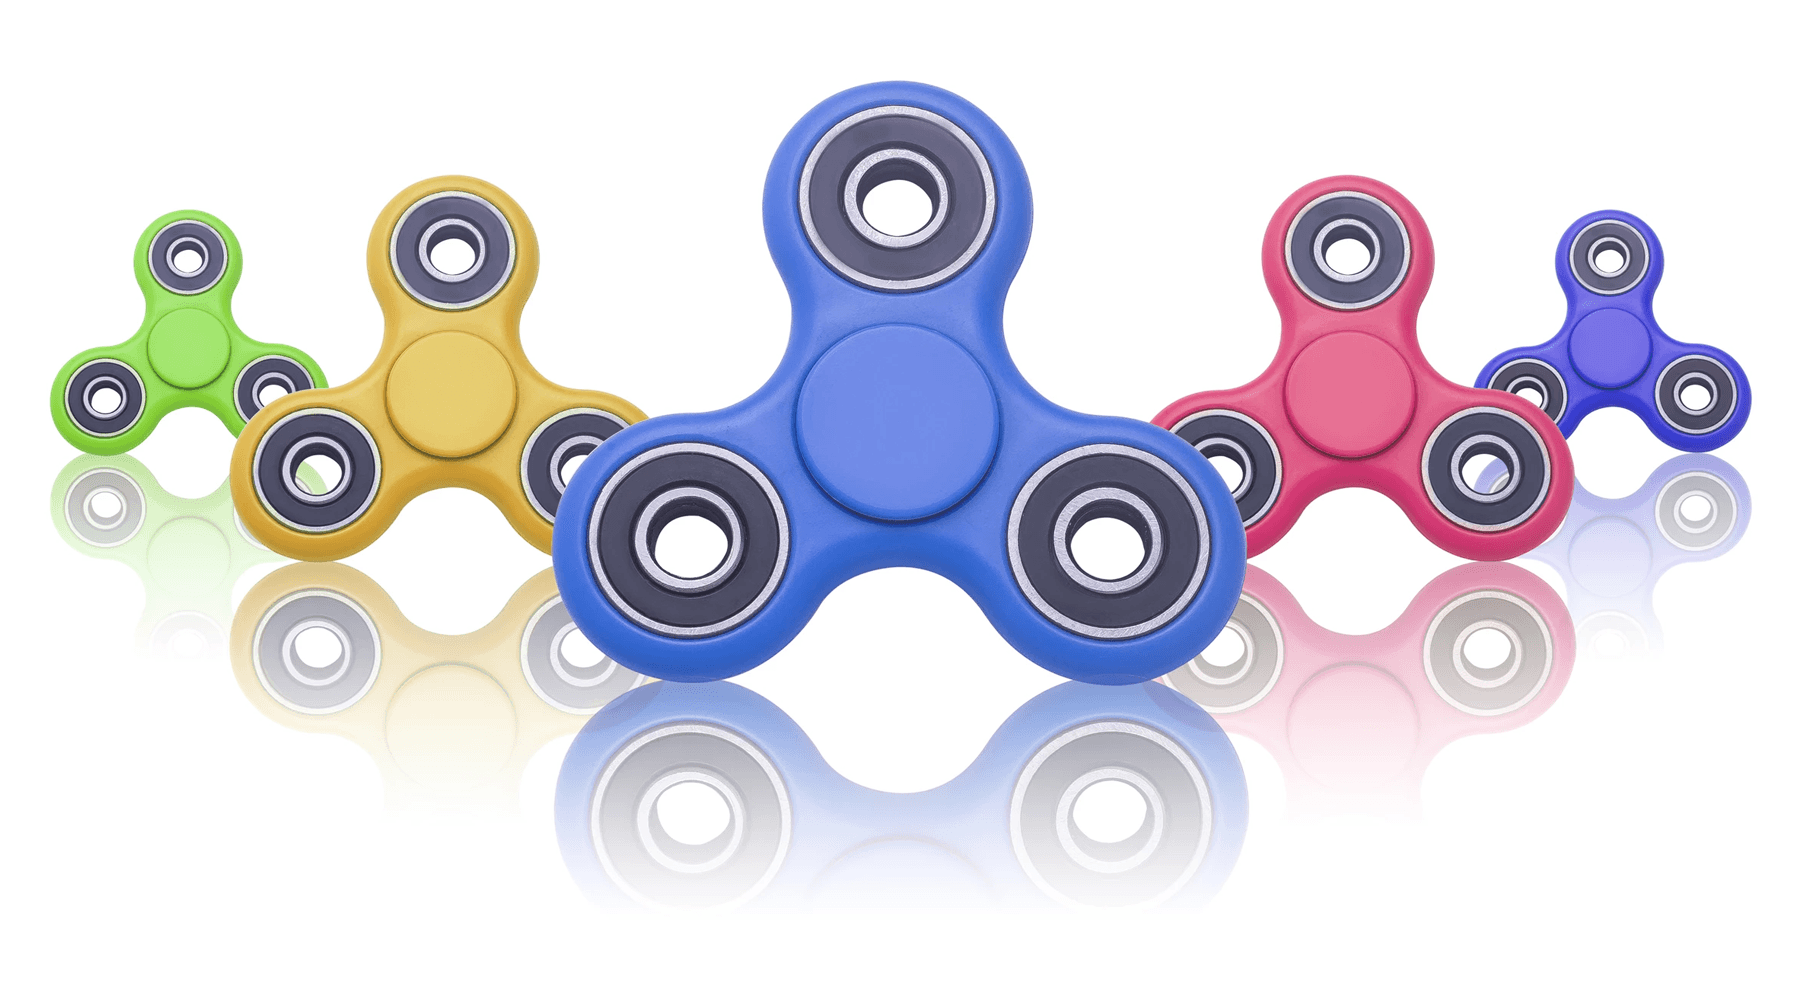 Fidget Spinners - What are They? And Why are they so Popular?